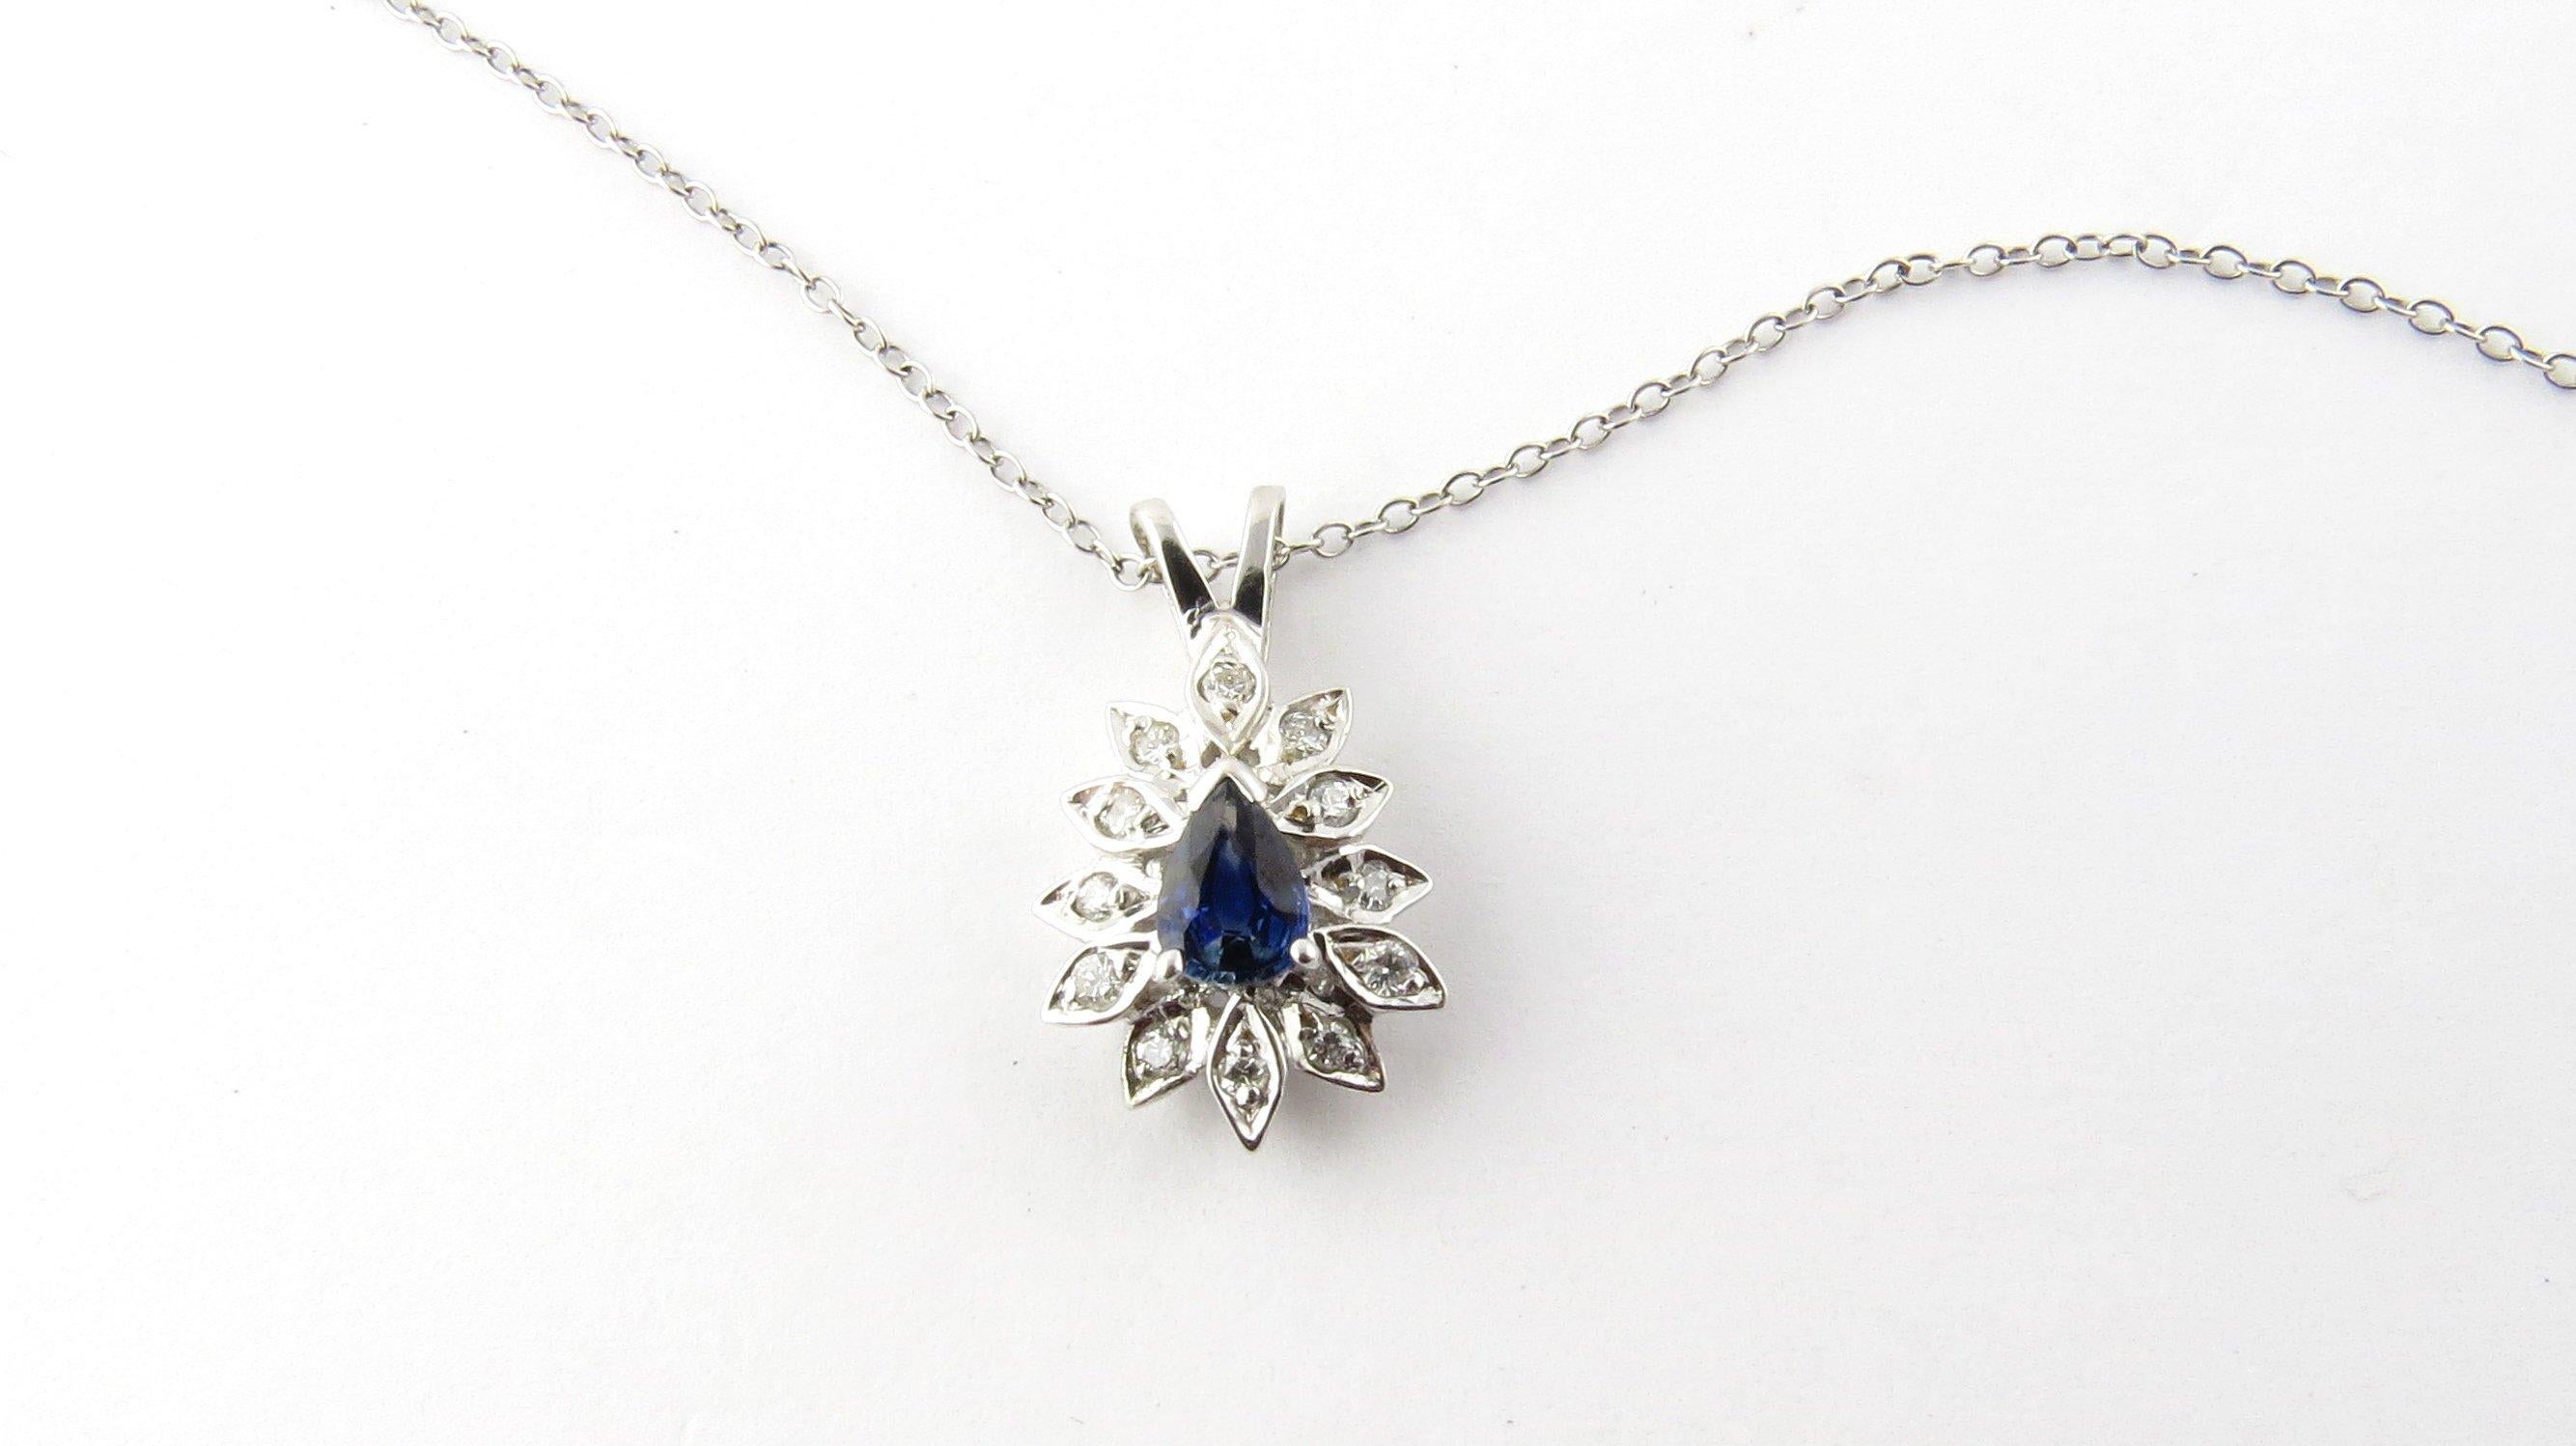 Vintage 14 Karat White Gold Sapphire and Diamond Pendant Necklace-

This lovely pendant features a pear-shaped sapphire (6 mm x 4 mm) surrounded by 12 round brilliant cut diamonds suspended from a classic 18 inch 14K white gold